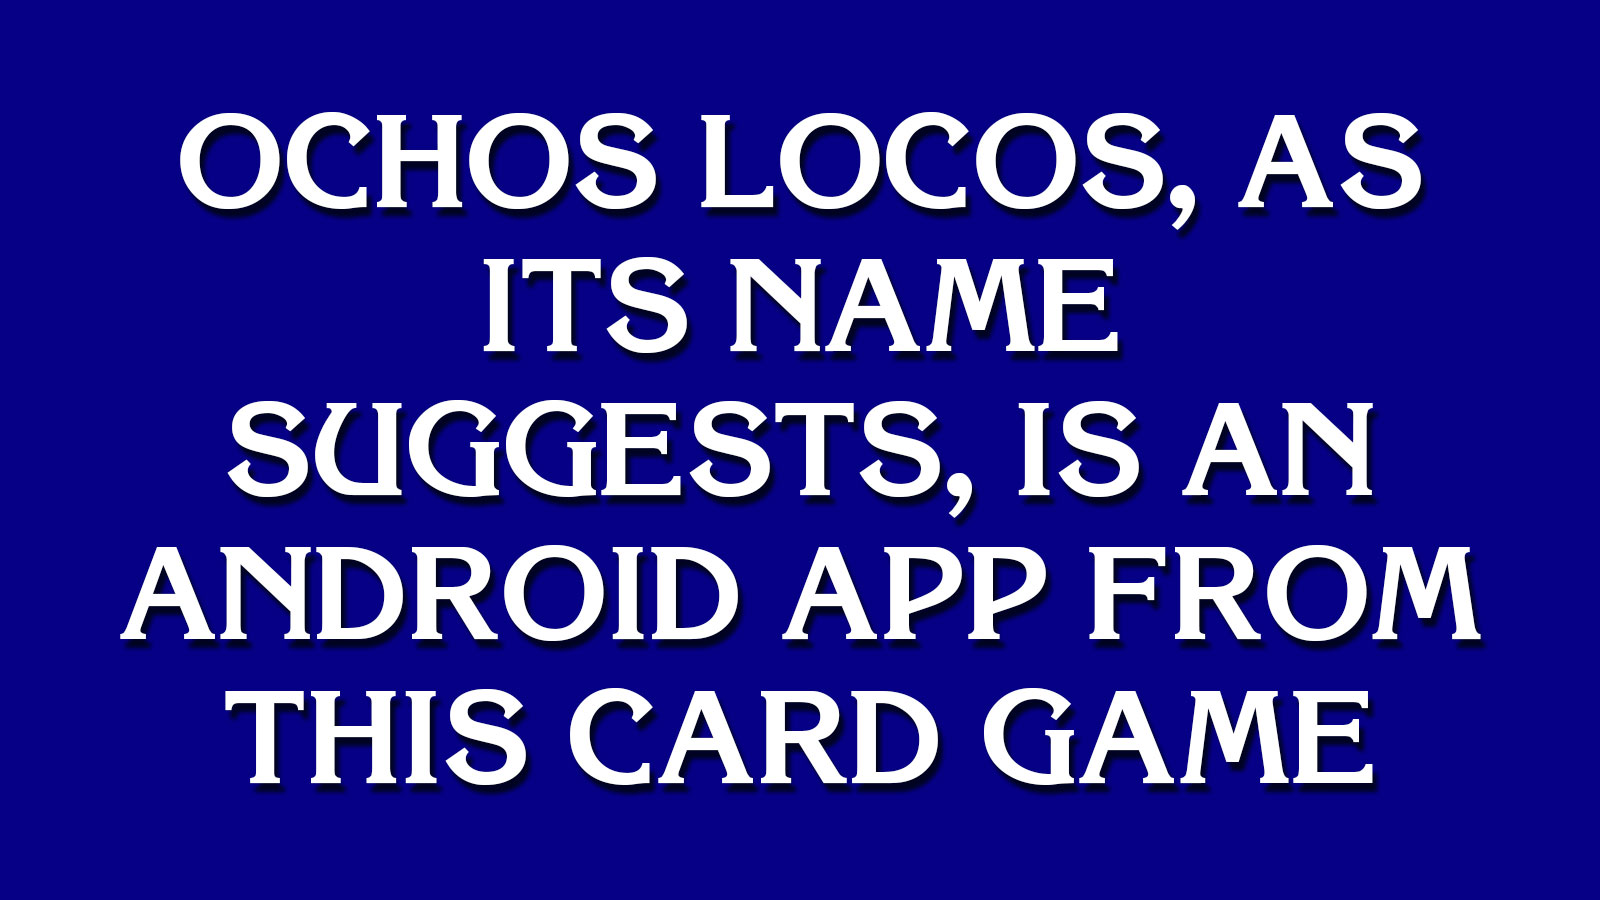 Can You Go on “Jeopardy!”? 104